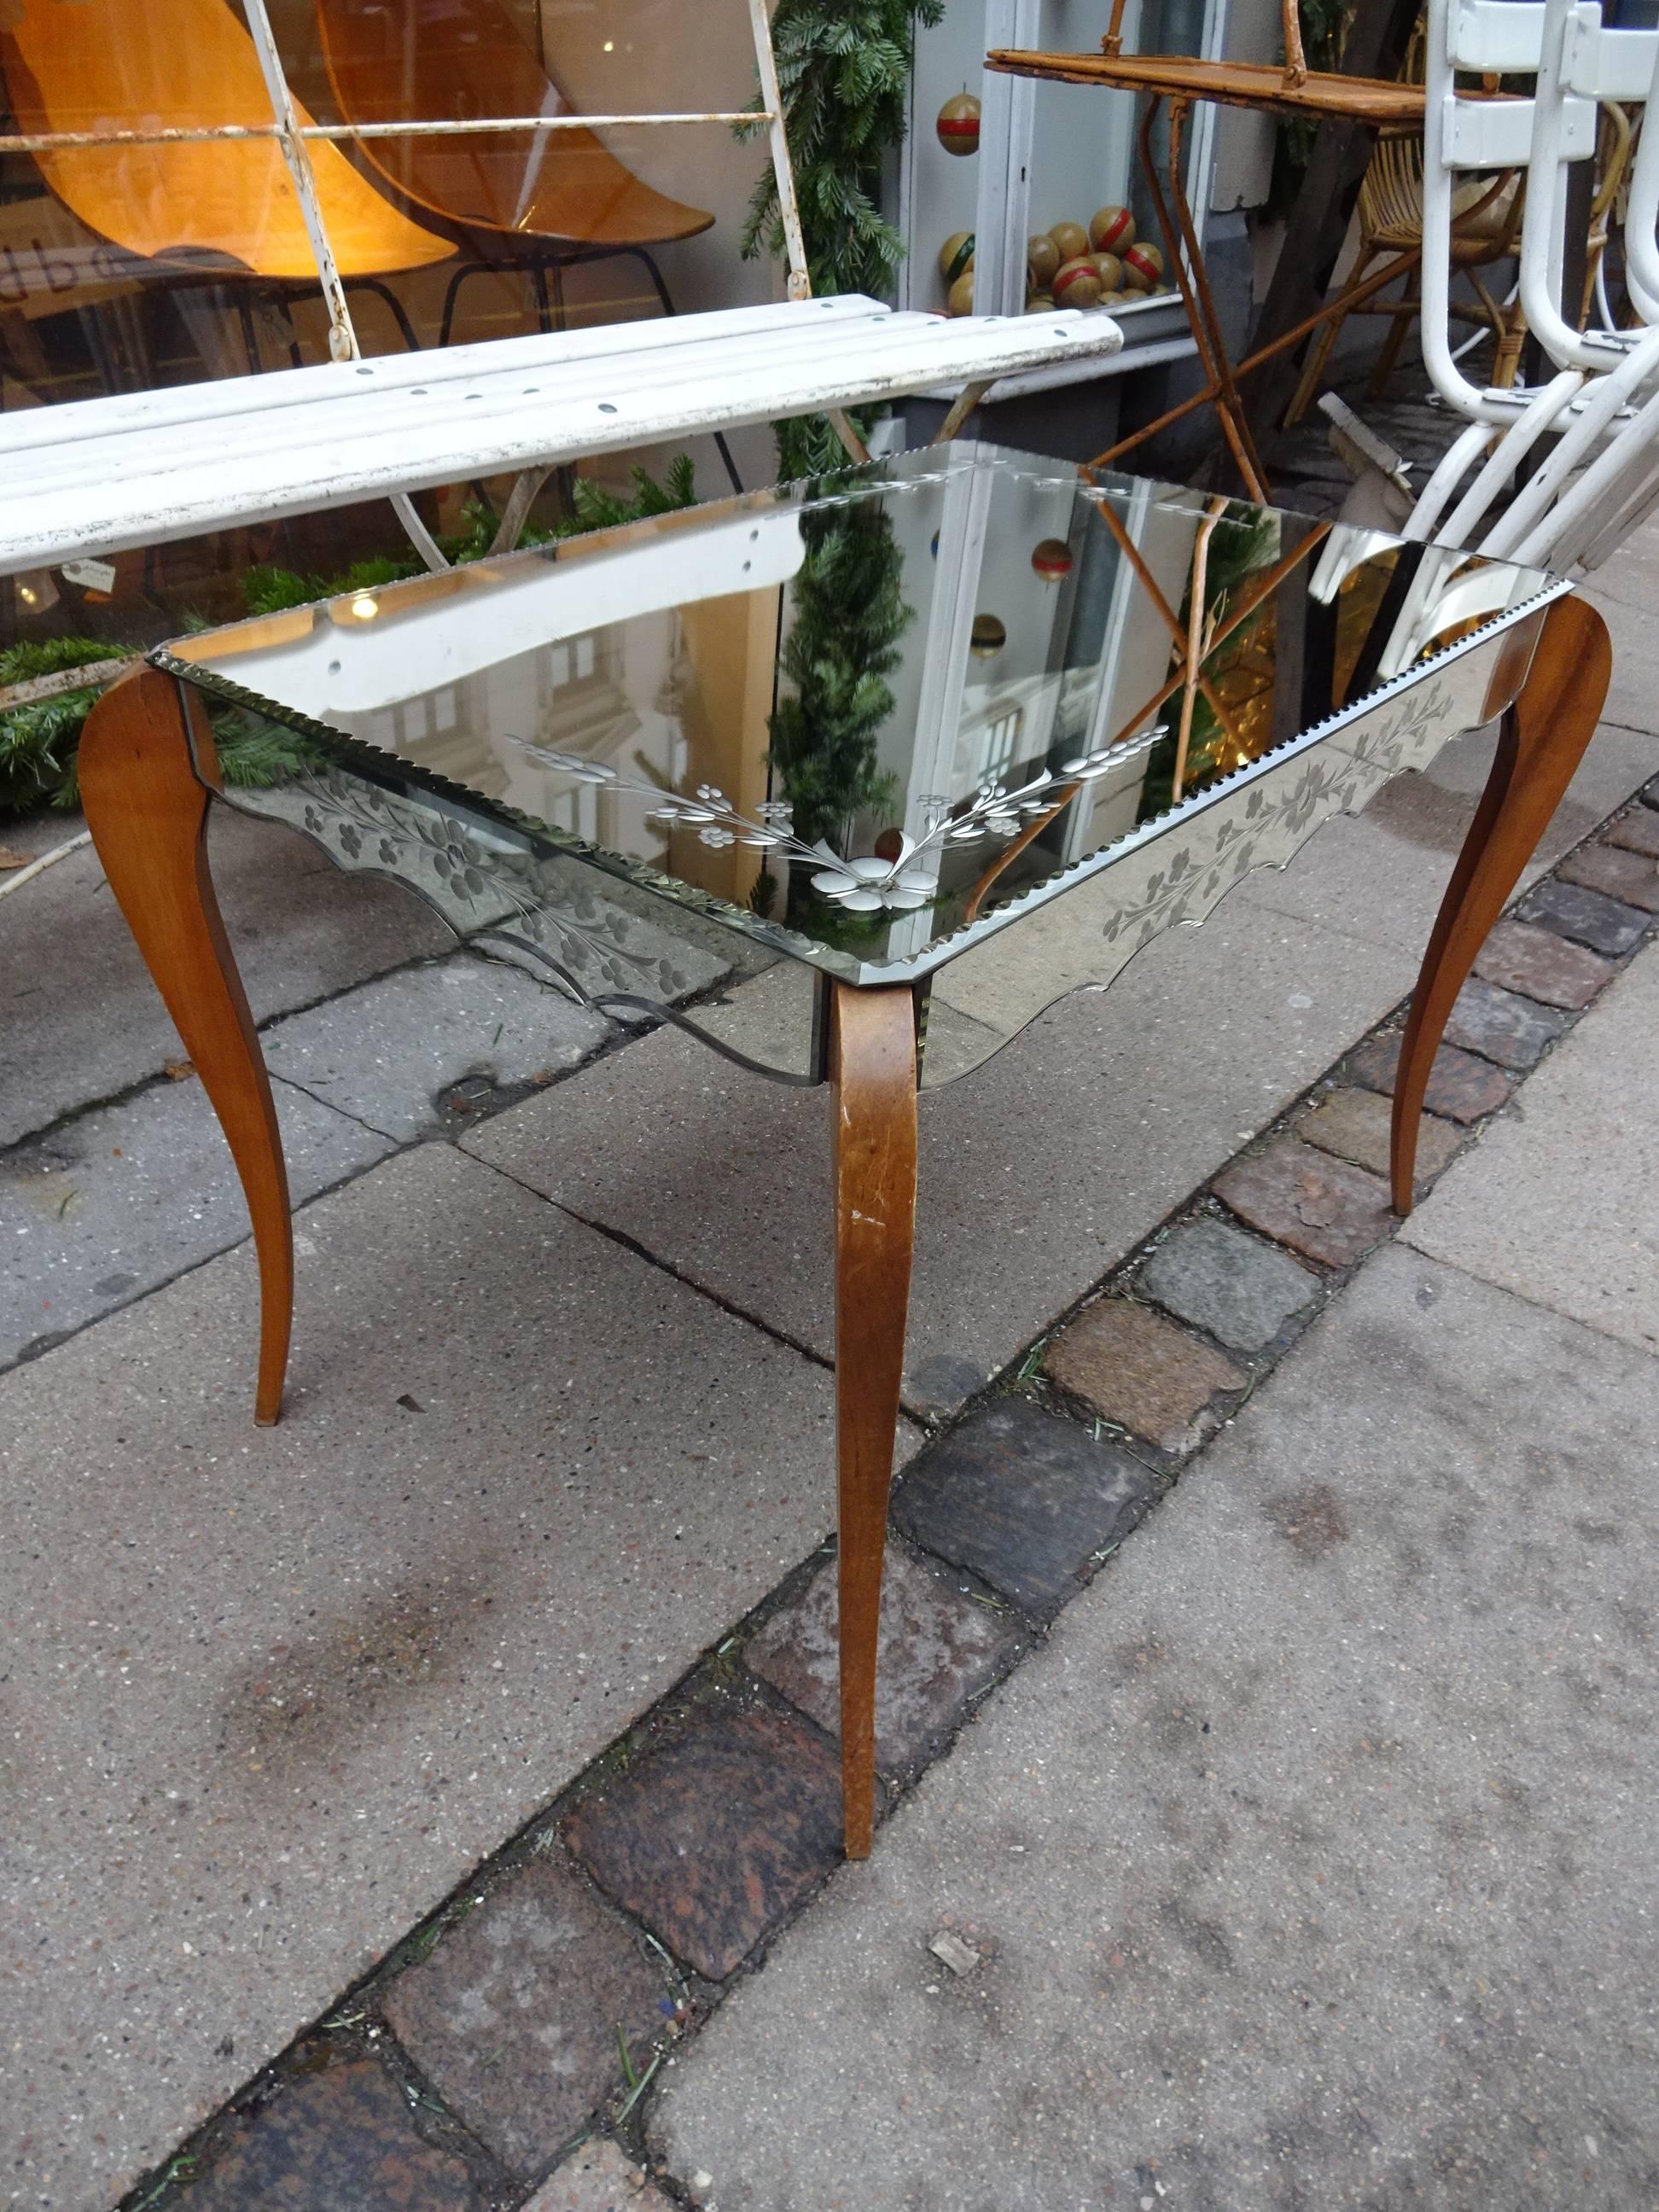 Lovely vintage French mirrored table, with super etched detailing and elegant legs. From the 1950s. Would be fantastic as a coffee table, side table or bedside table.